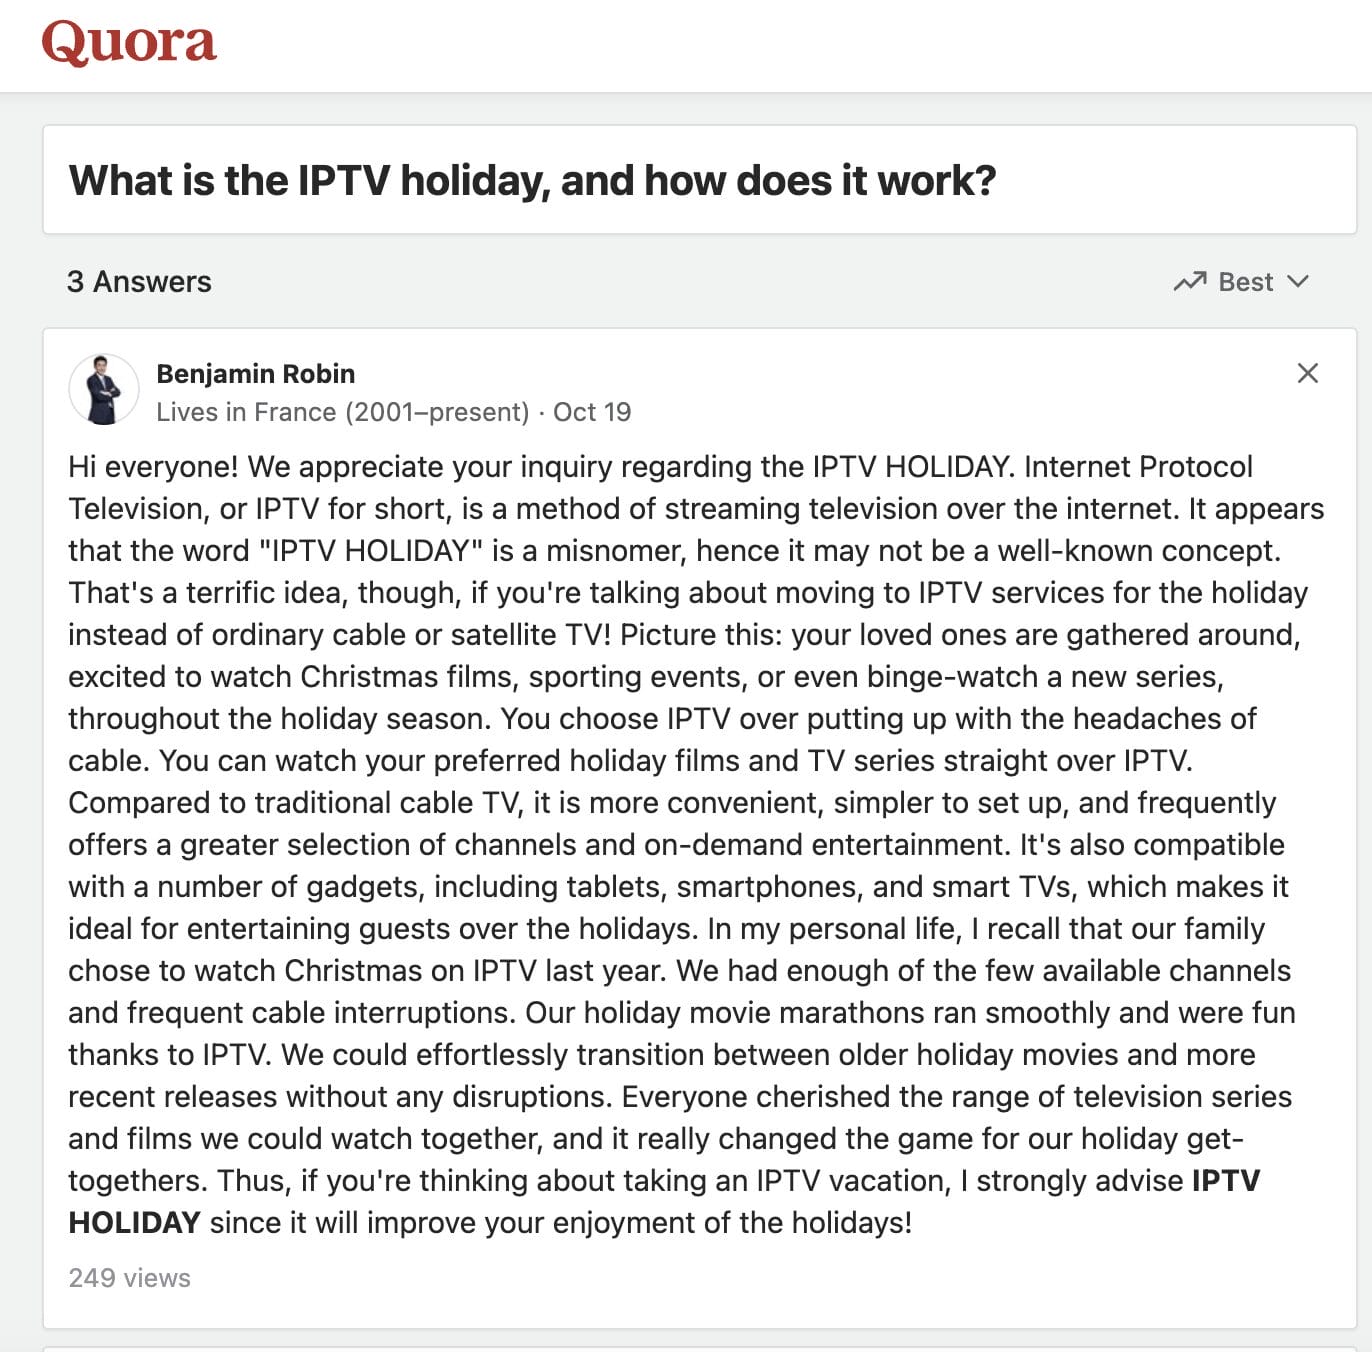 IPTV Holiday Review on Quora